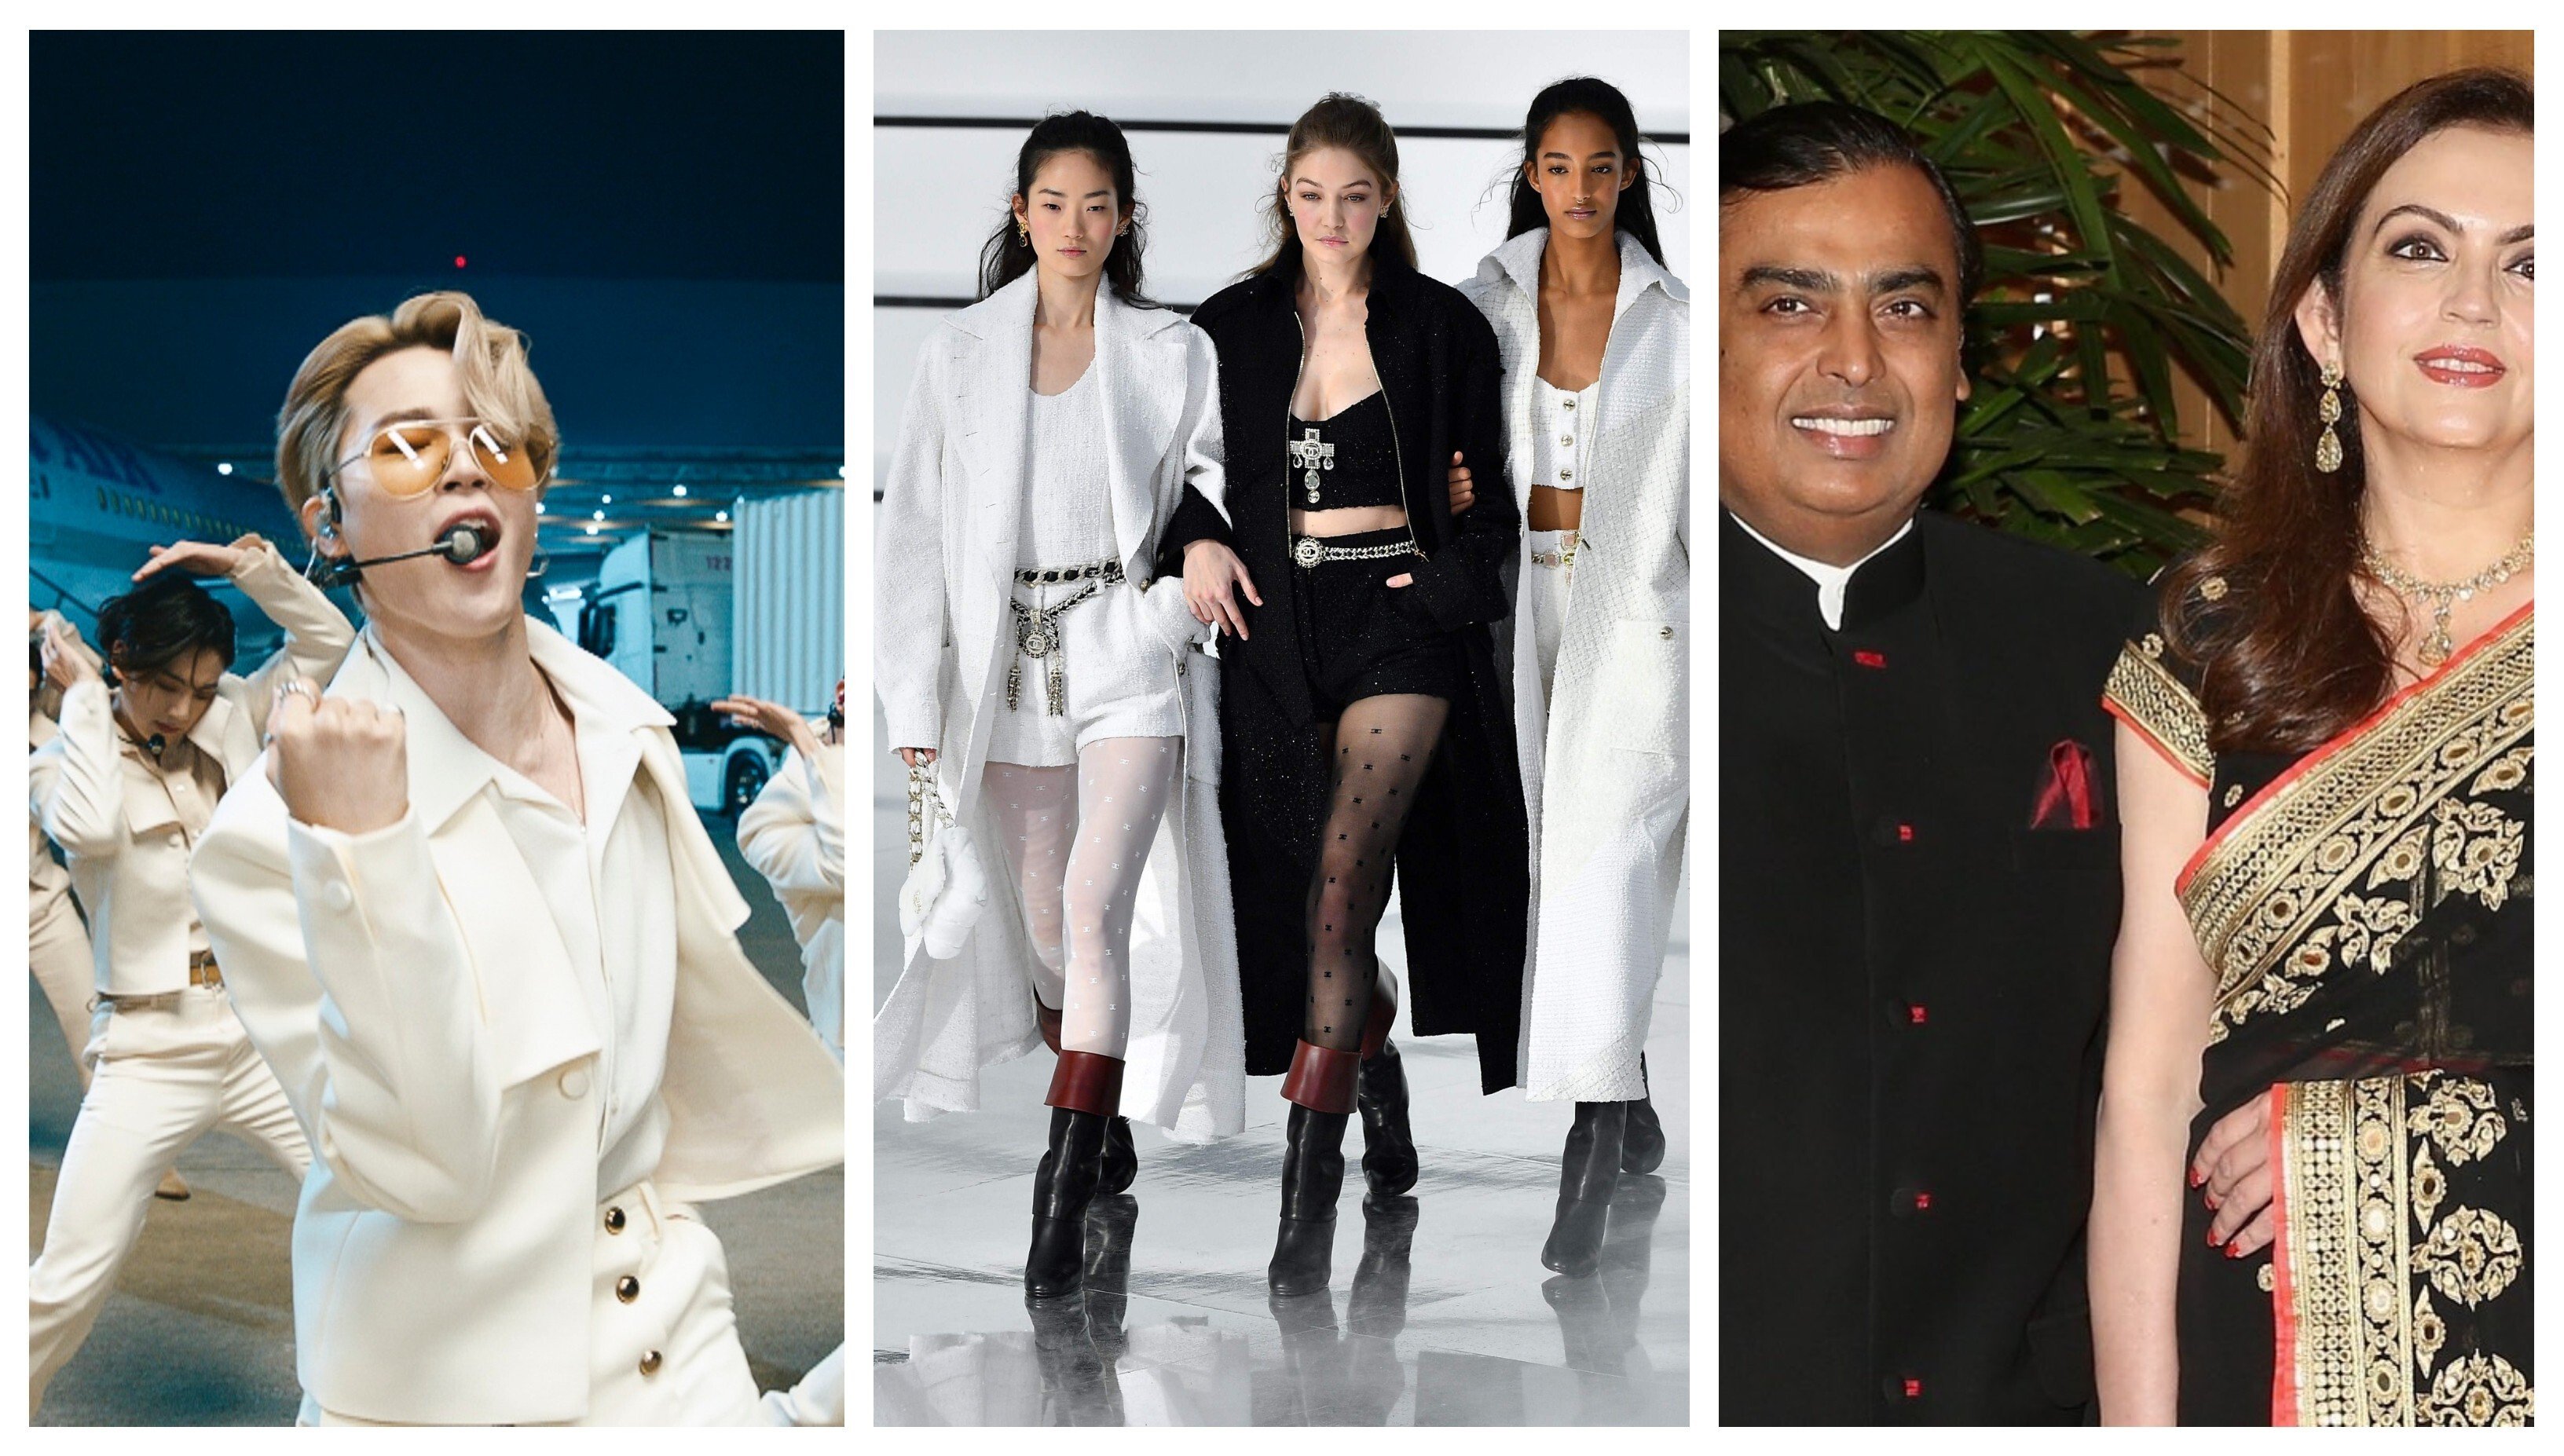 BTS, Chanel’s runway and the Ambanis all made our most watched YouTube videos of the year. See where they ranked on the list. Photos: CBS via Getty Images, Wires, @nita_ambani77/Instagram